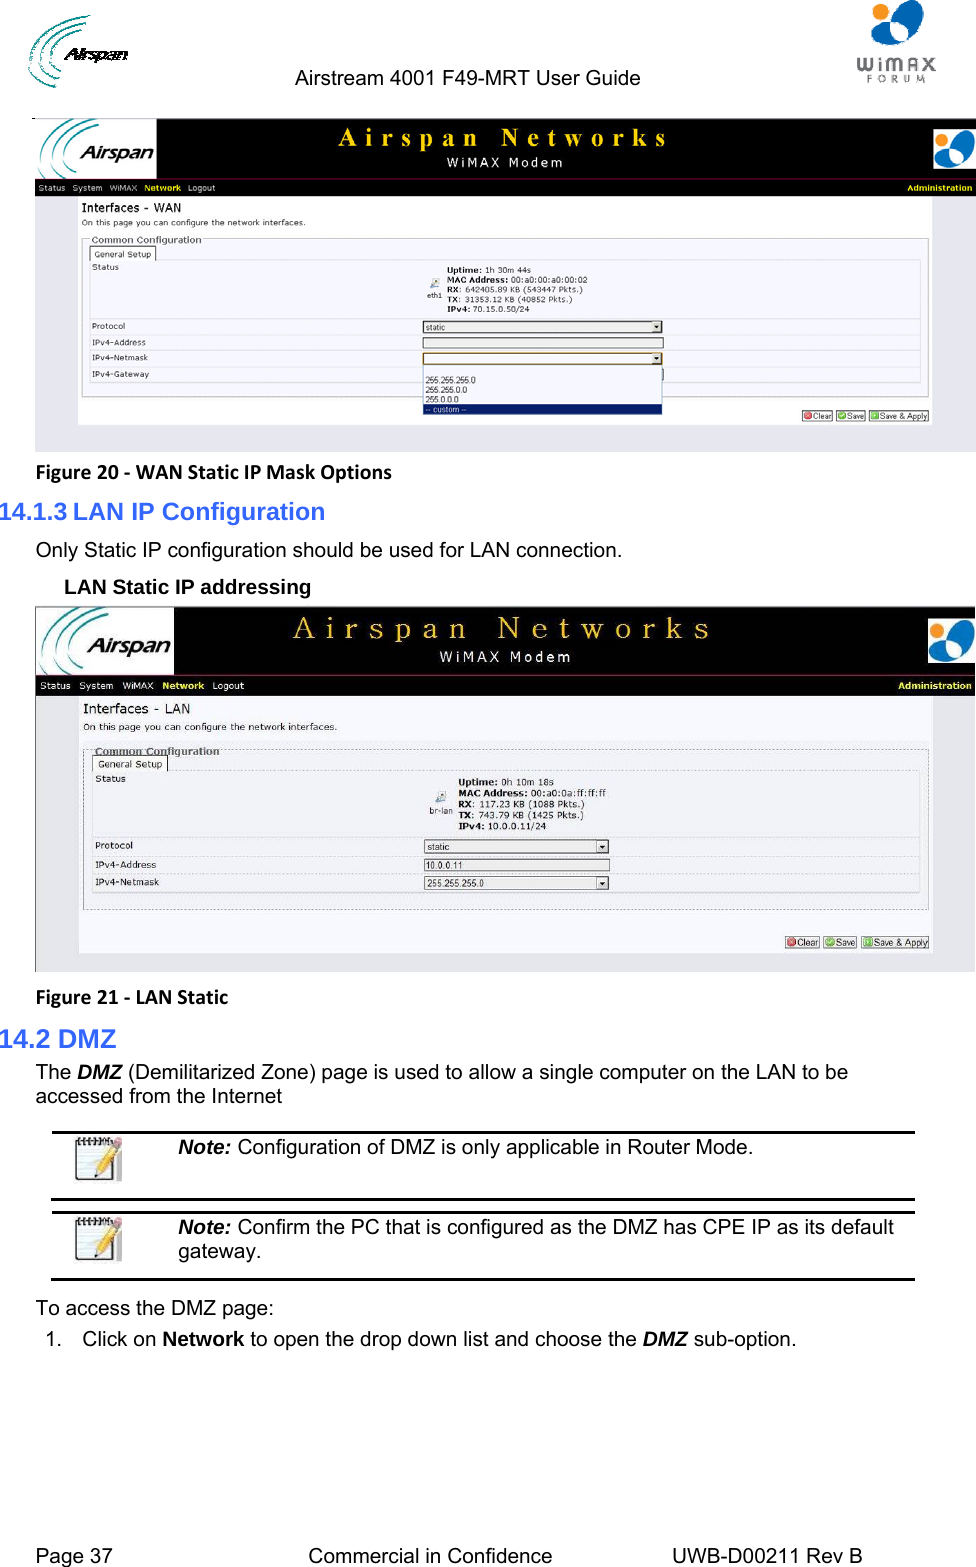                                  Airstream 4001 F49-MRT User Guide  Page 37  Commercial in Confidence  UWB-D00211 Rev B    Figure20‐WANStaticIPMaskOptions14.1.3 LAN IP Configuration  Only Static IP configuration should be used for LAN connection.  LAN Static IP addressing  Figure21‐LANStatic14.2 DMZ The DMZ (Demilitarized Zone) page is used to allow a single computer on the LAN to be accessed from the Internet   Note: Configuration of DMZ is only applicable in Router Mode.   Note: Confirm the PC that is configured as the DMZ has CPE IP as its default gateway.  To access the DMZ page: 1. Click on Network to open the drop down list and choose the DMZ sub-option. 